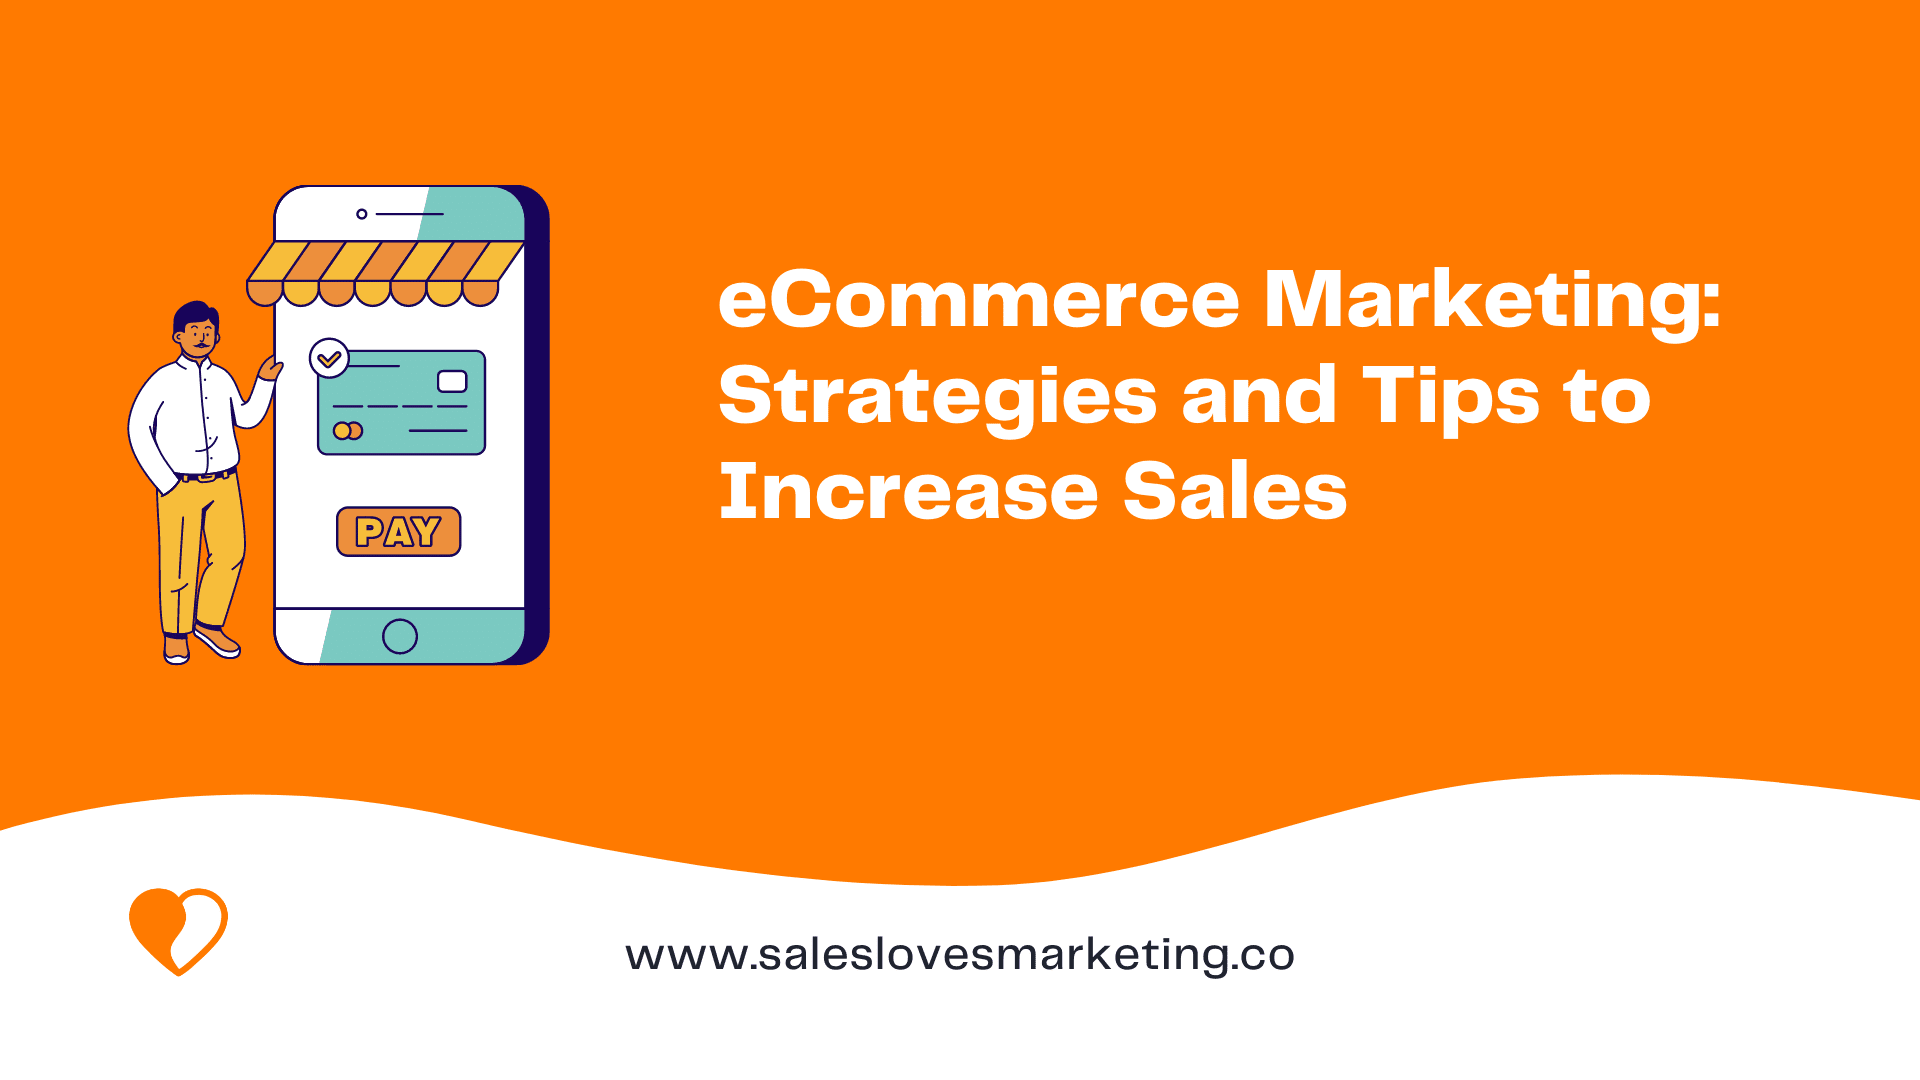 New to eCommerce Marketing: Strategies and Tips to Increase Sales